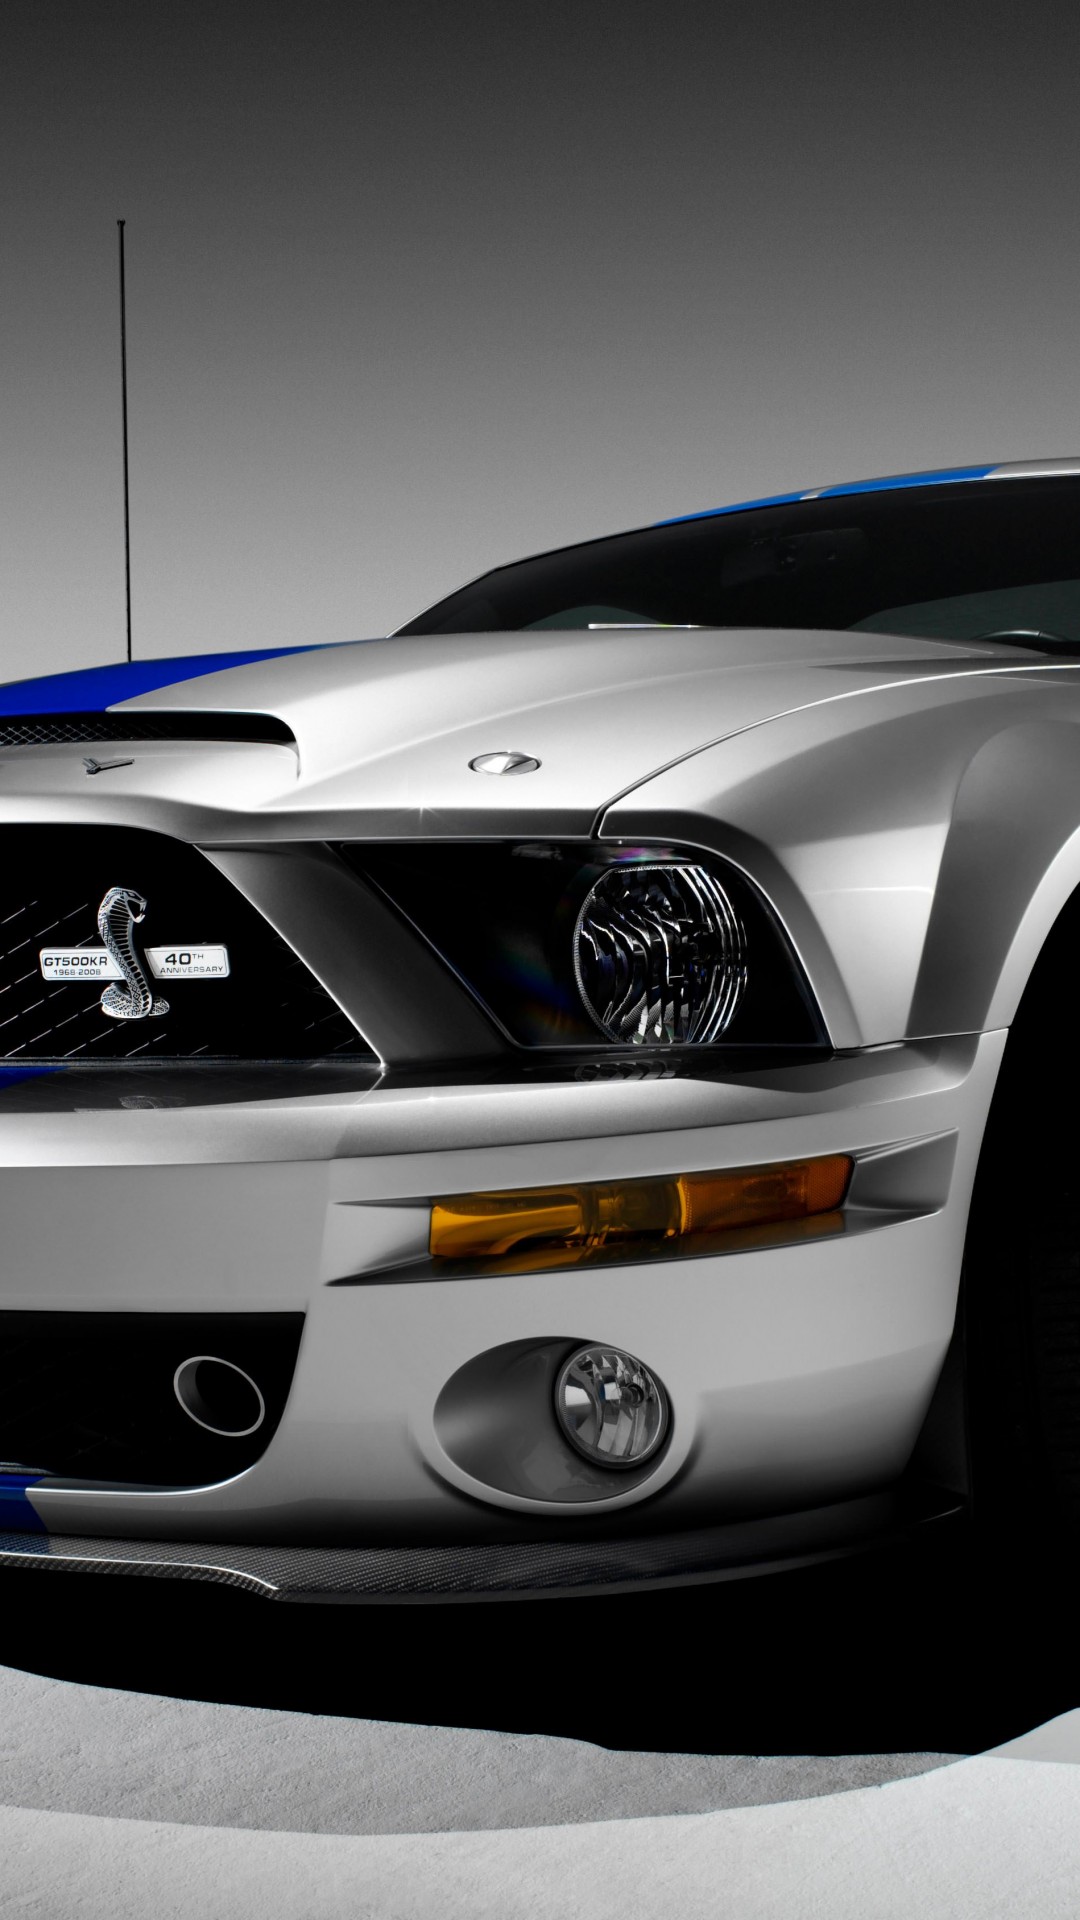 Shelby Mustang GT500KR Wallpaper for SAMSUNG Galaxy S4